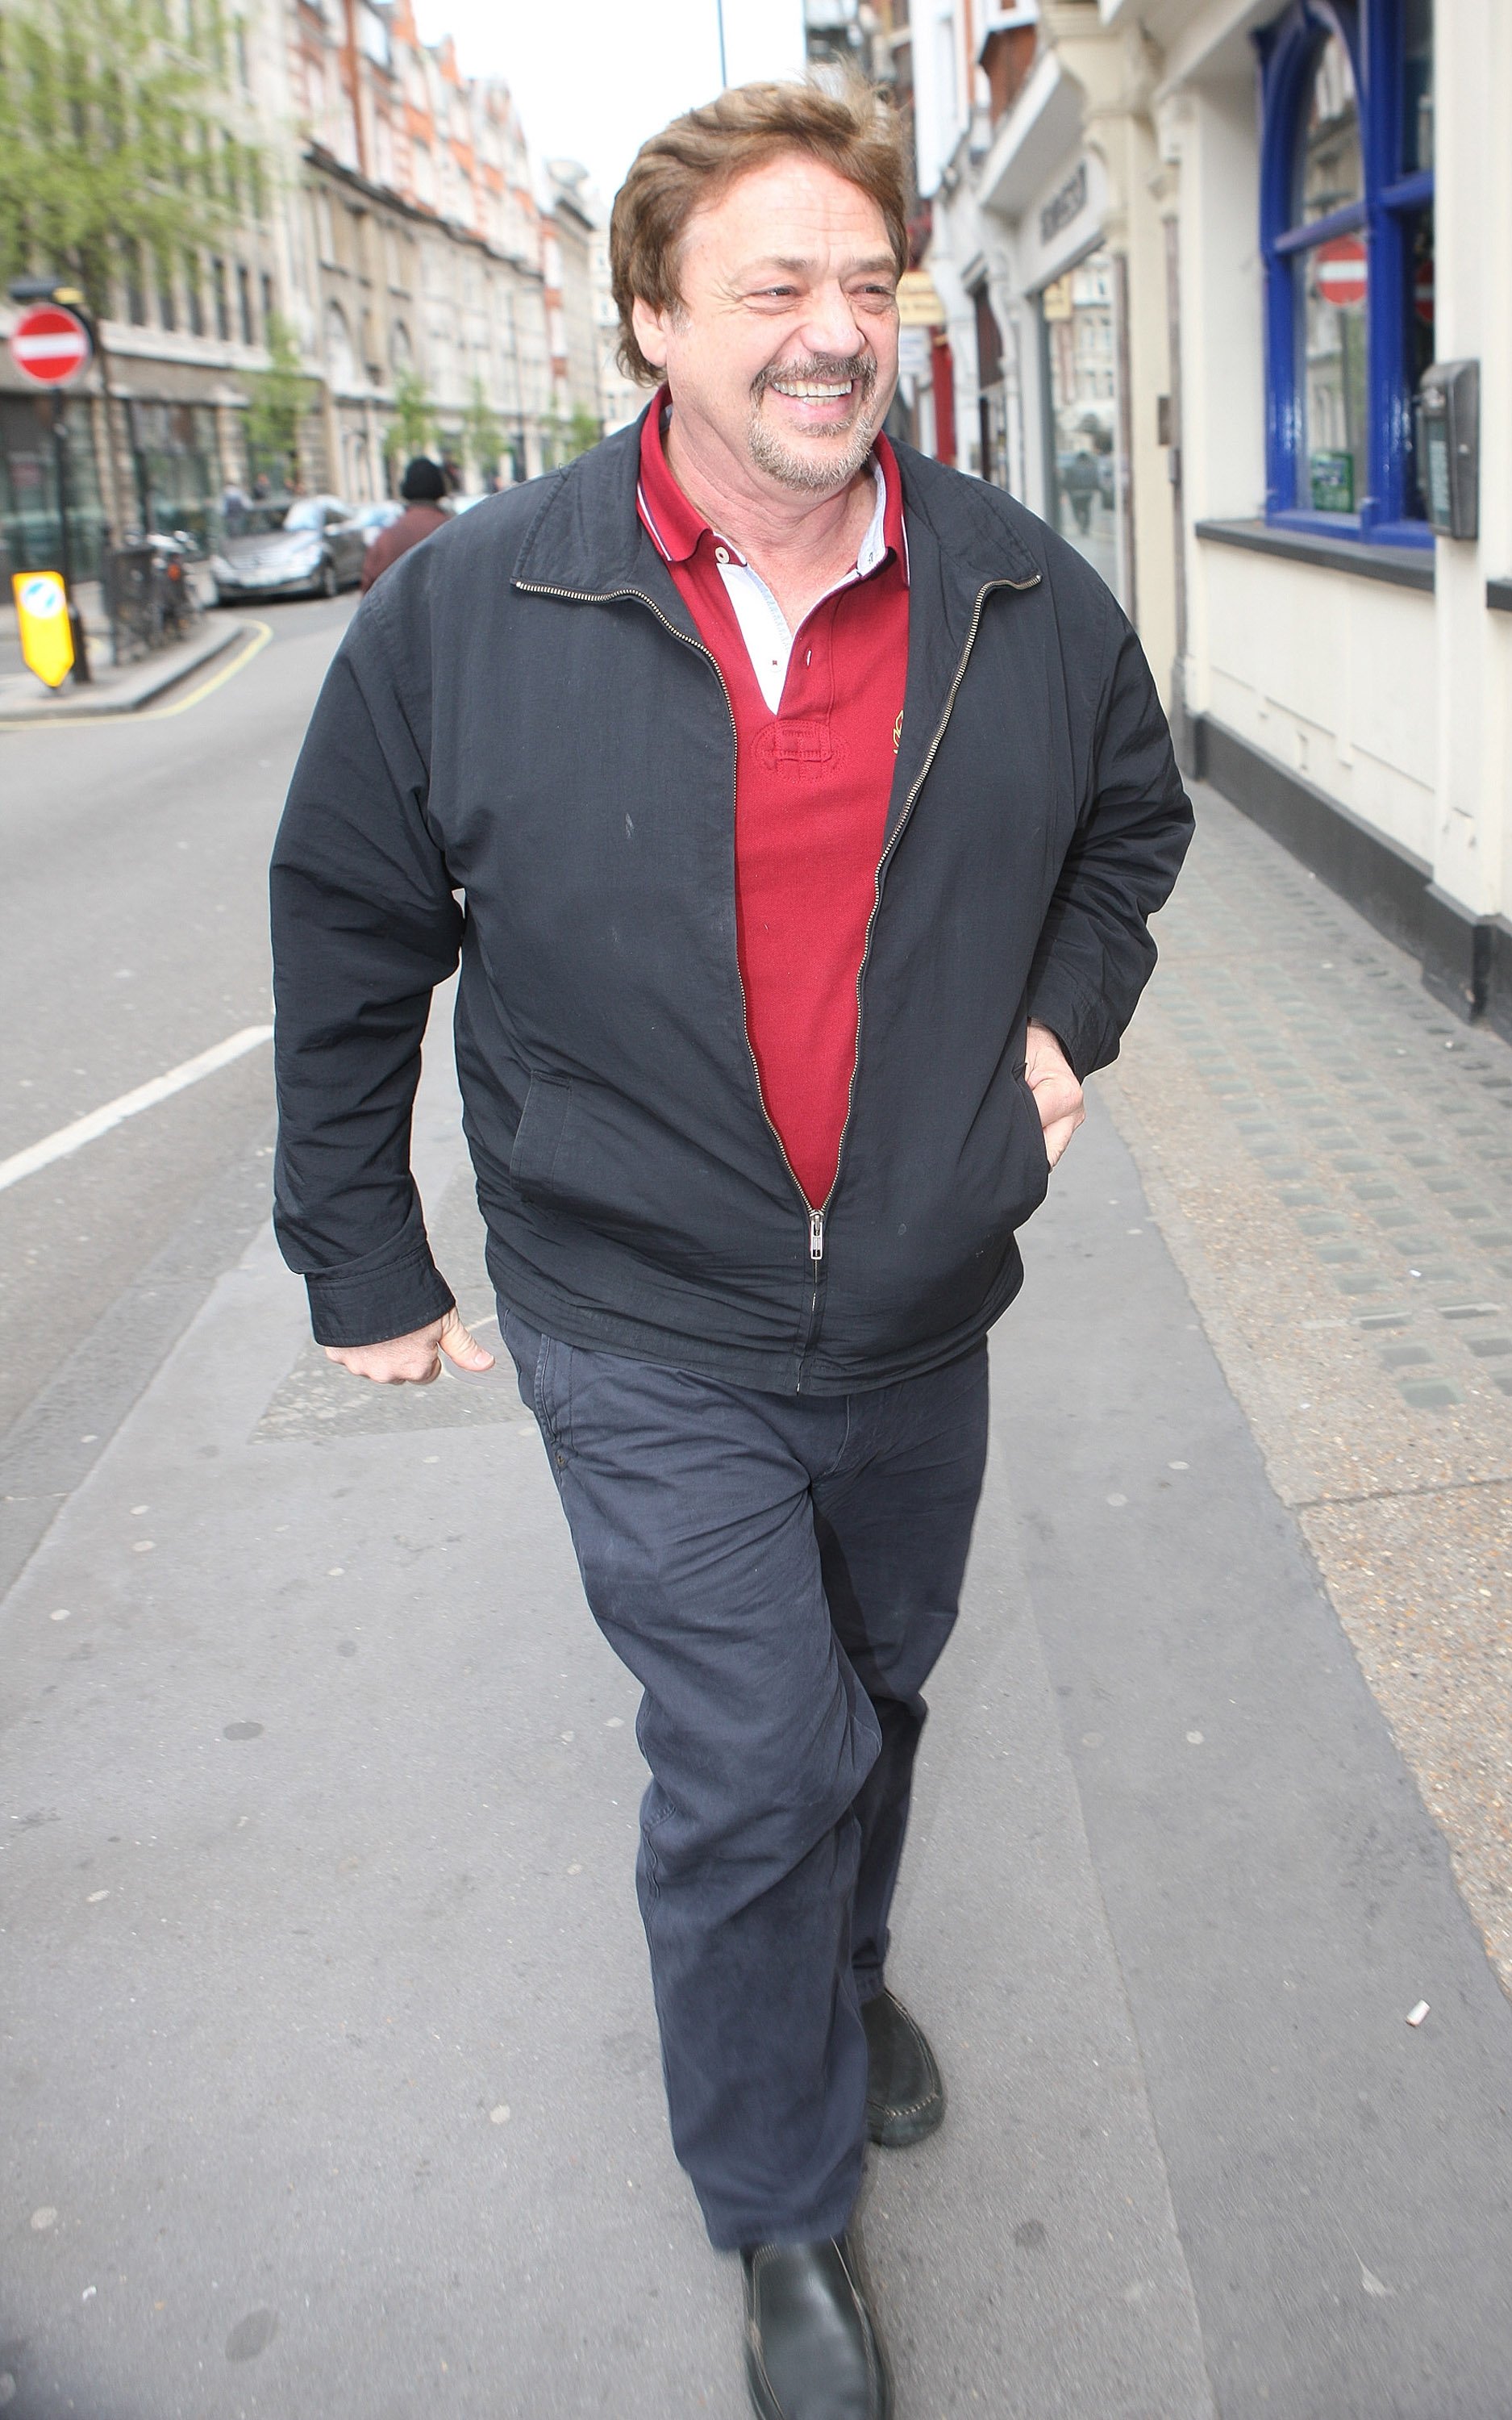 Jay Osmond sighted at BBC Radio 2 on April 16, 2012, in London, England. | Source: Getty Images.